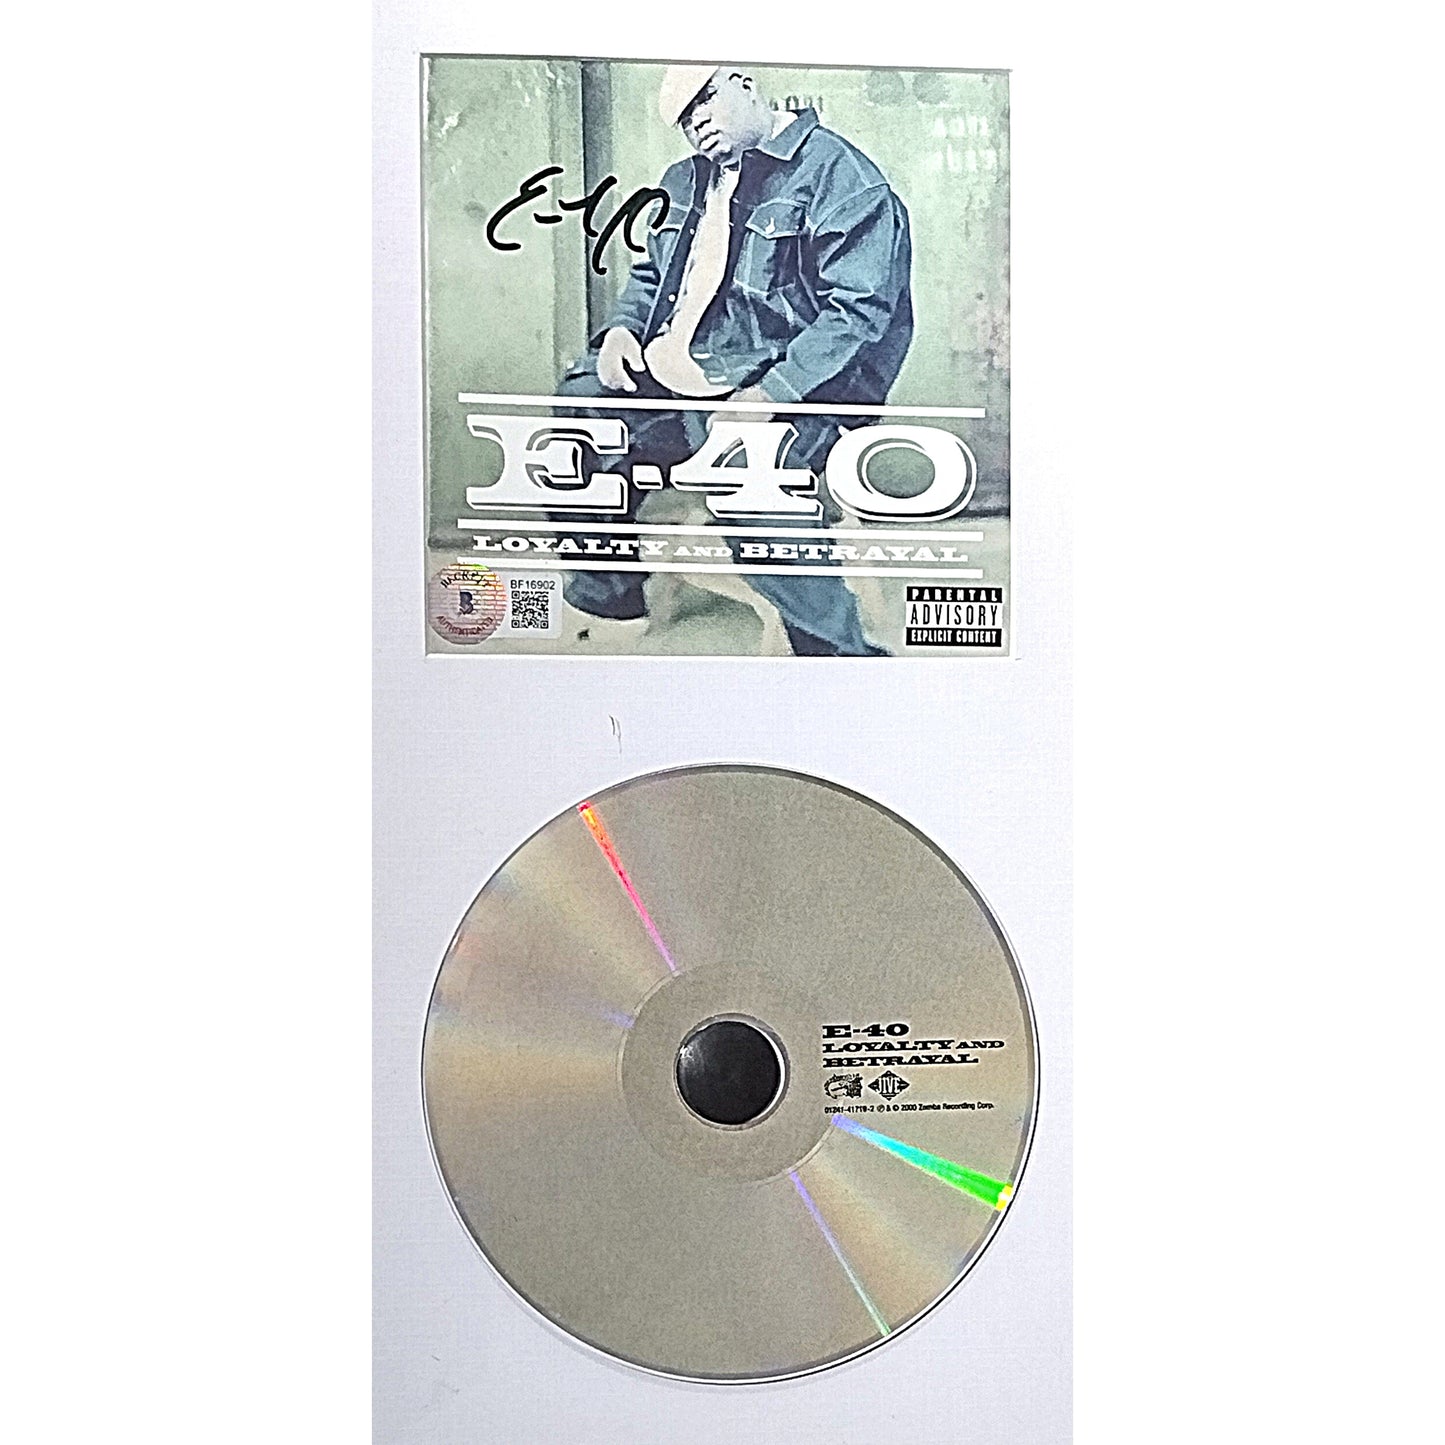 Music- Autographed- Rapper E-40 Signed Loyalty and Betrayal CD Cover Framed and Matted Display Beckett Certified Authentic BF16902 - 102